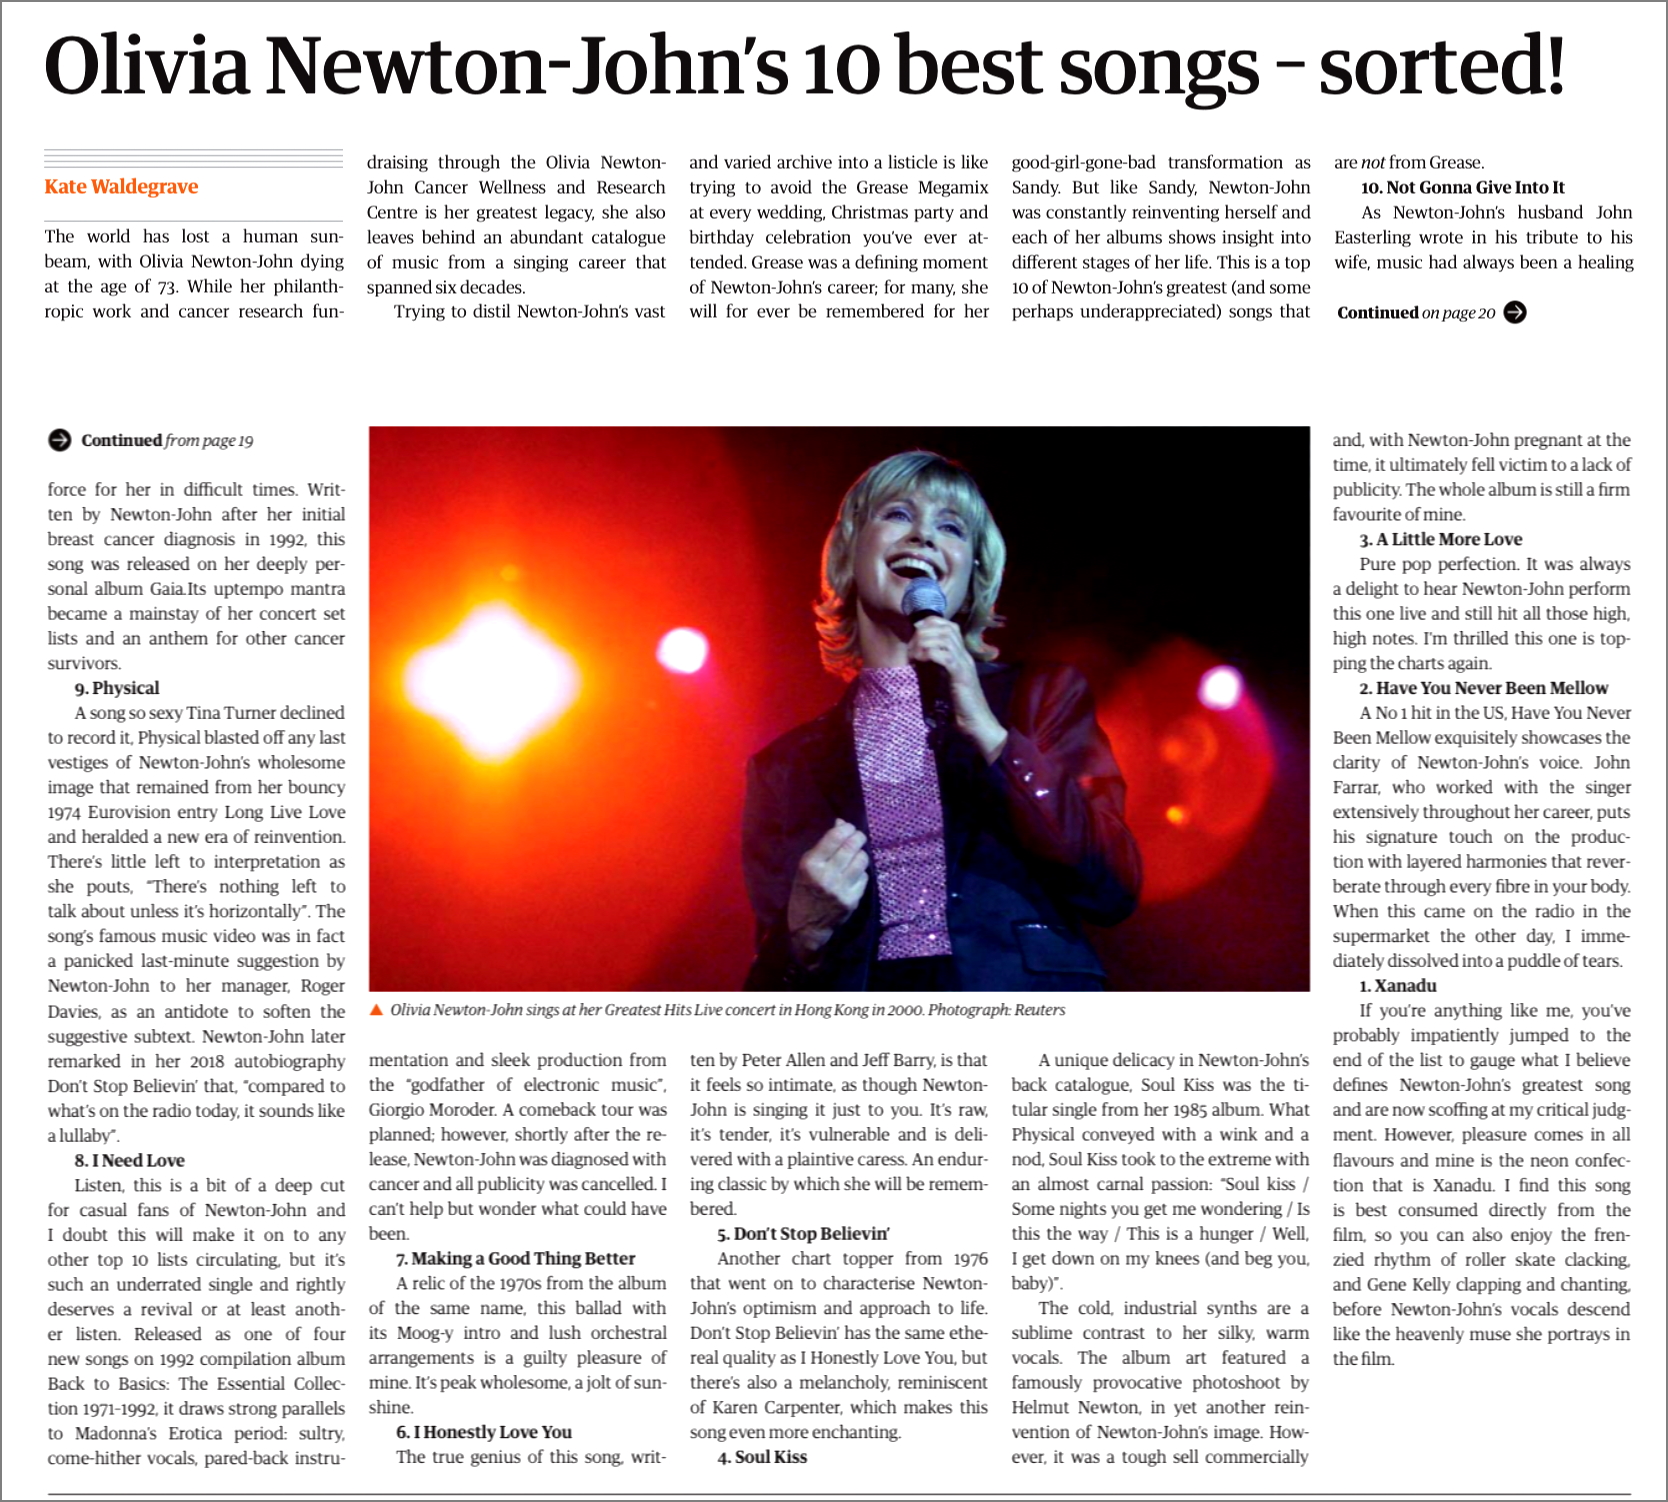 Olivia's Top 10 Best Songs - The Guardian